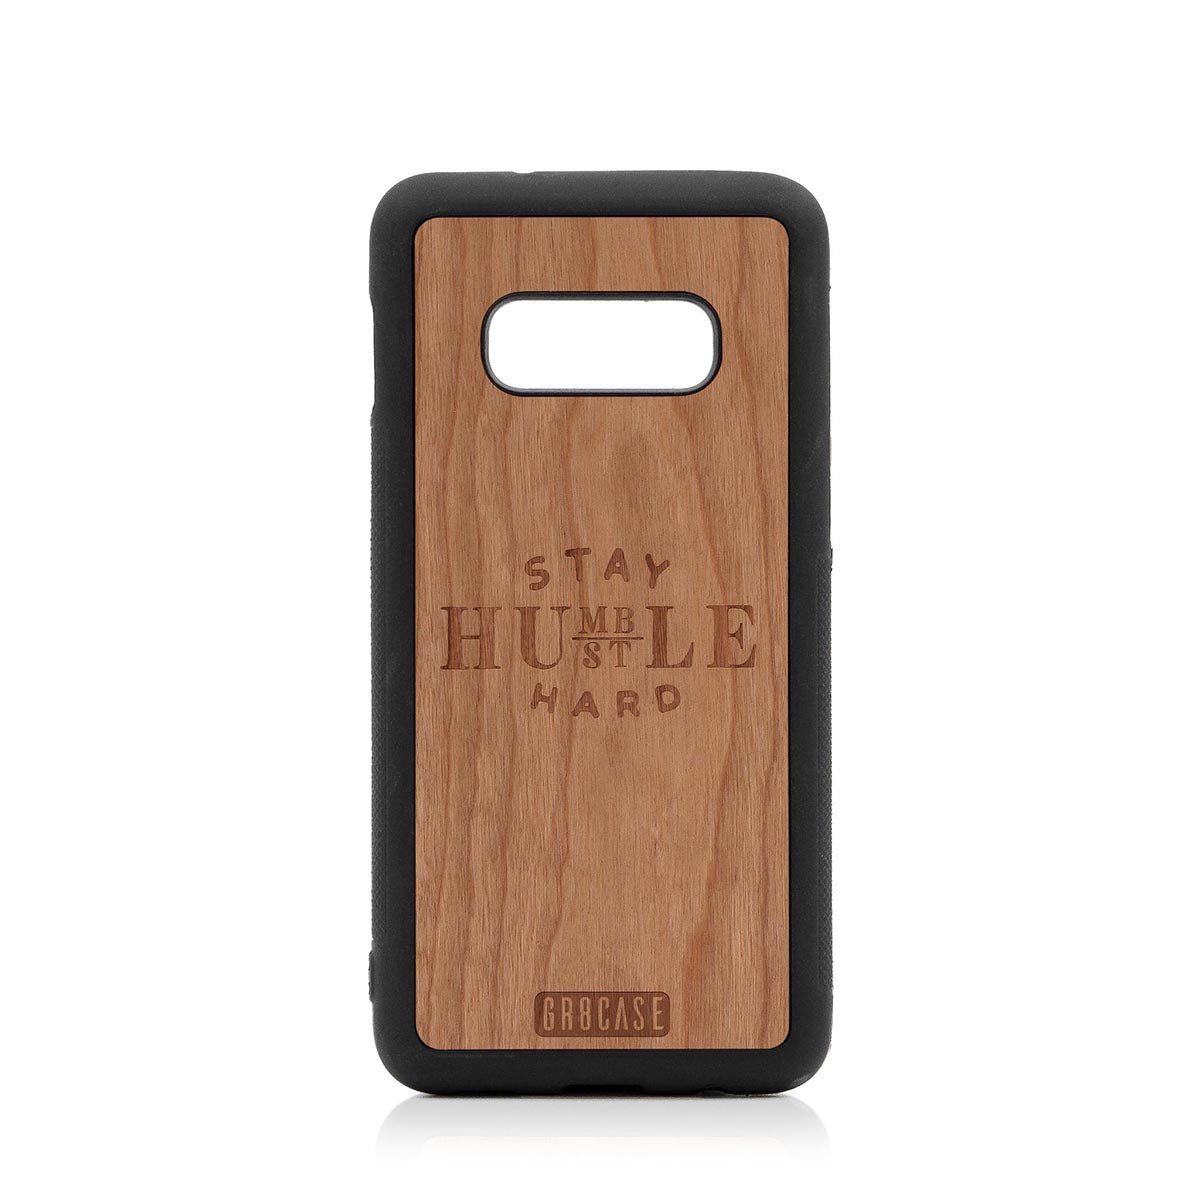 Stay Humble Hustle Hard Design Wood Case Samsung Galaxy S10E by GR8CASE